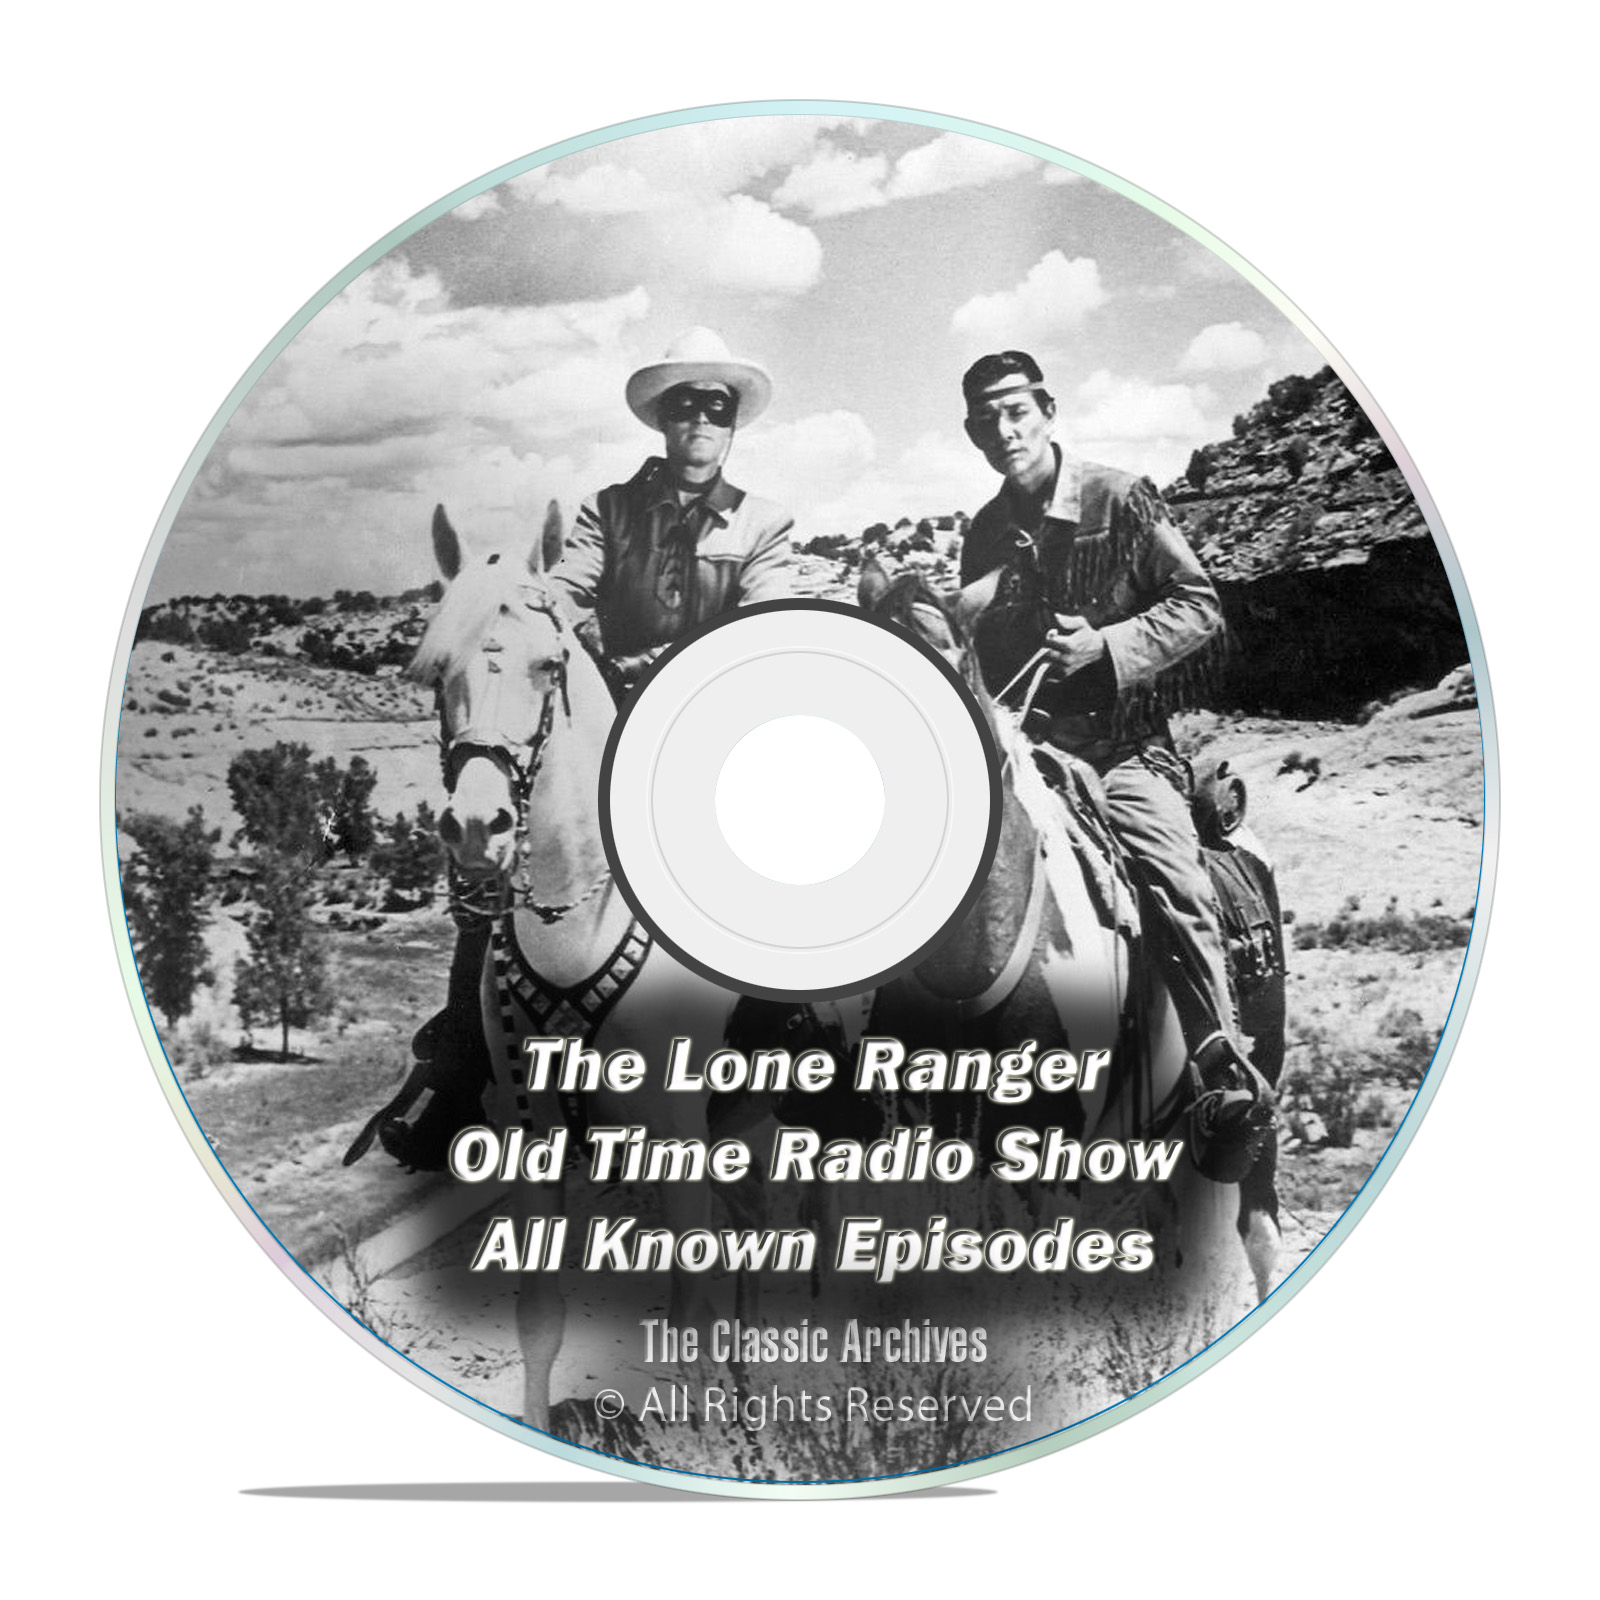 The Lone Ranger, 2,357 Shows, Complete Set, Old Time Radio MP3 2 DVD SET